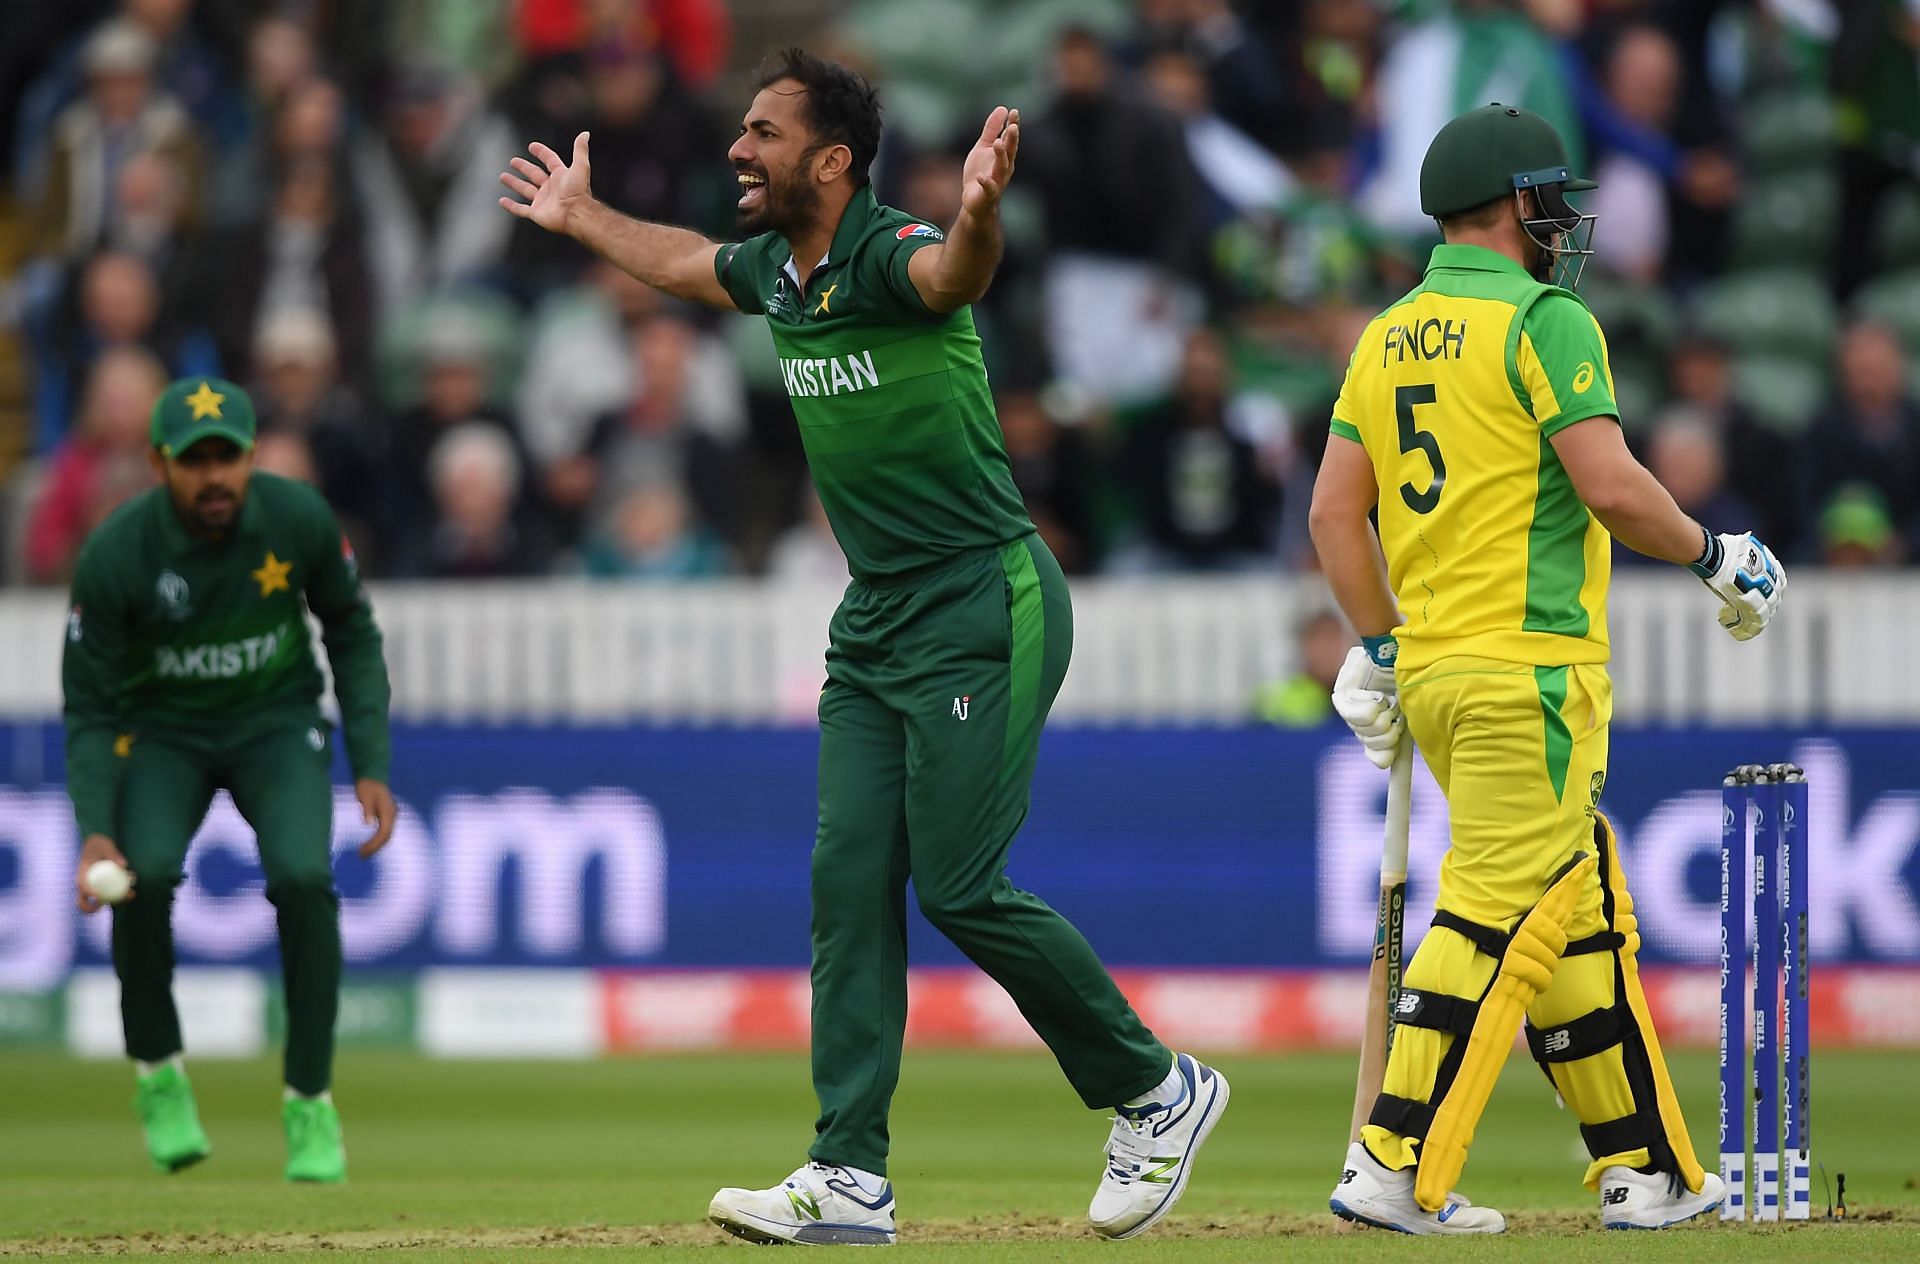 Wahab Riaz's top 3 spells in the ODI World Cup